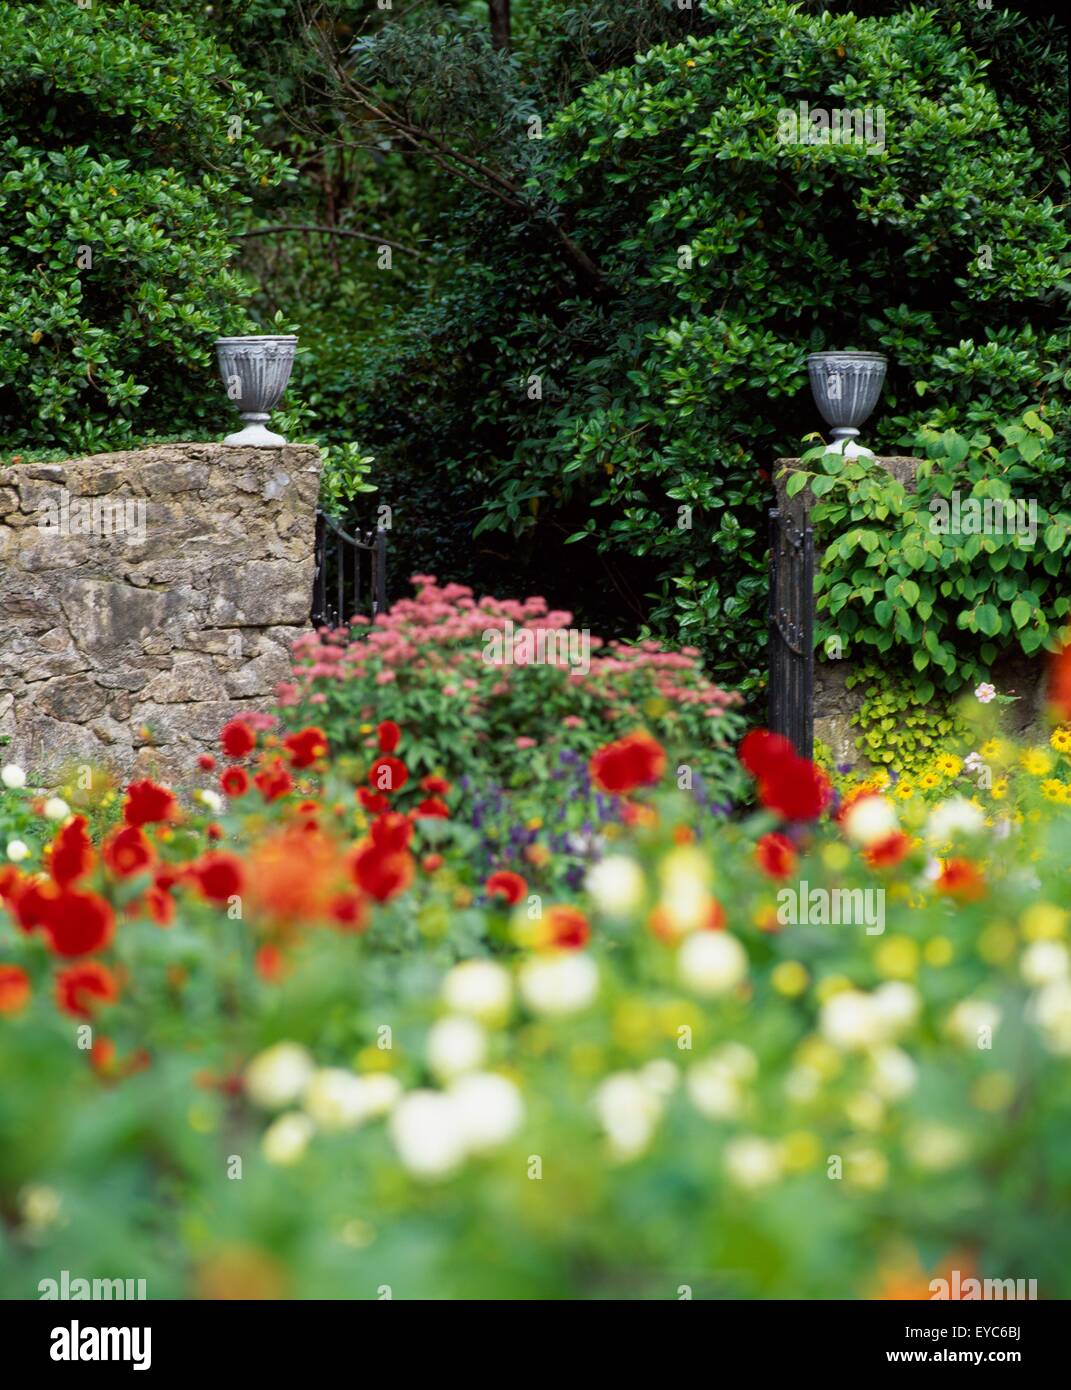 Flowerbed And Stone Wall; Landscaped Garden Stock Photo